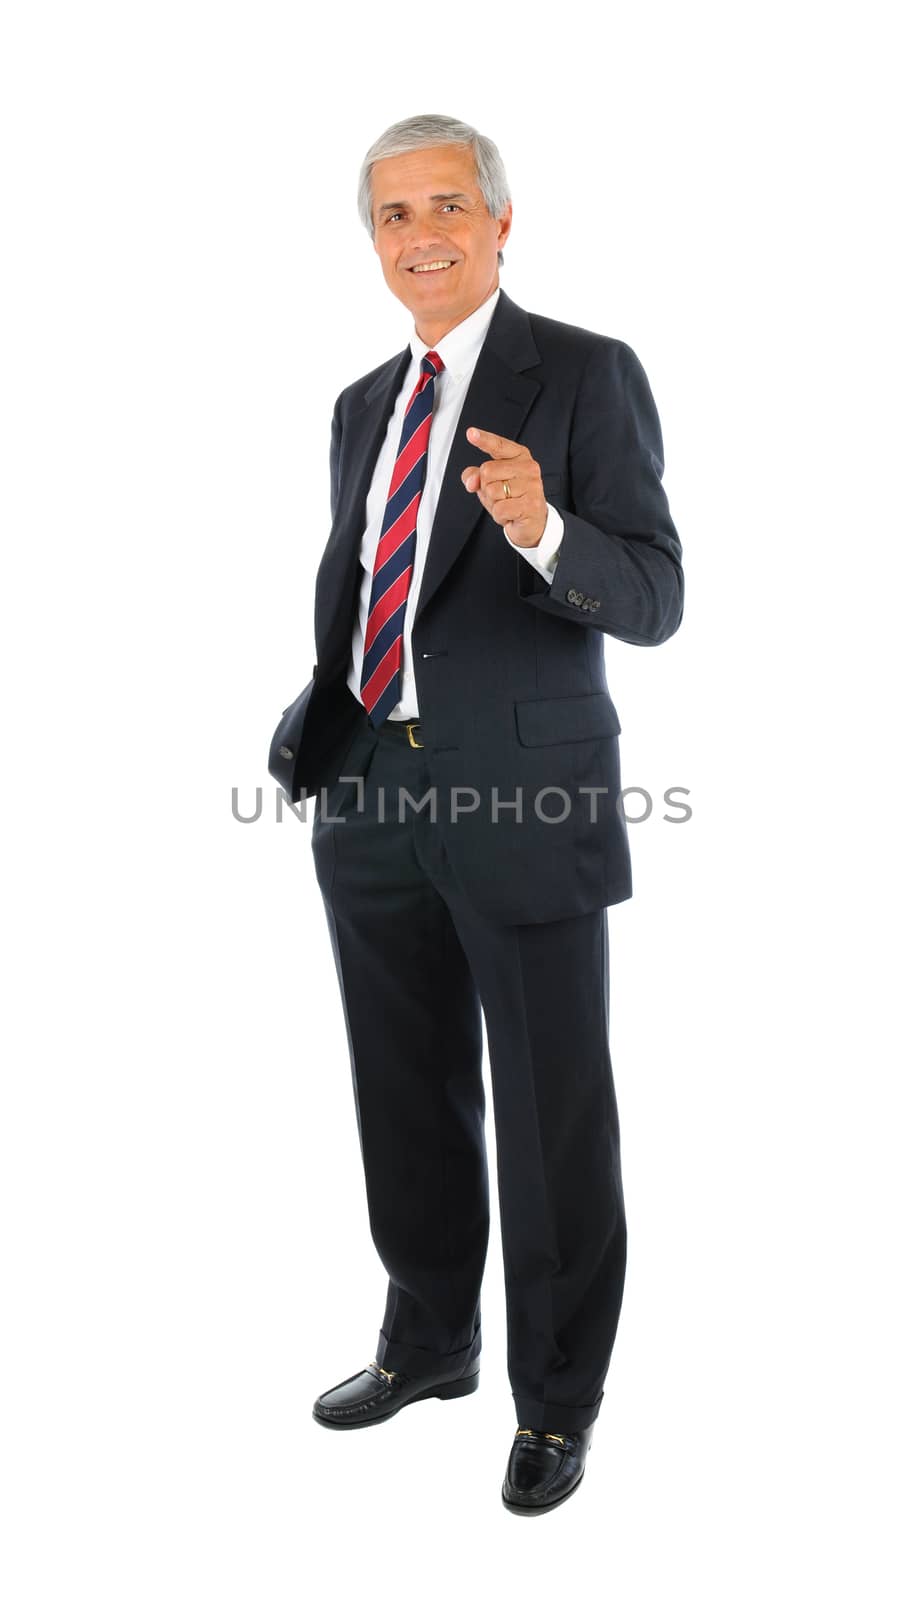 Smiling middle aged businessman standing and pointing with one hand and the other hand in his pocket. Full length over a white background.